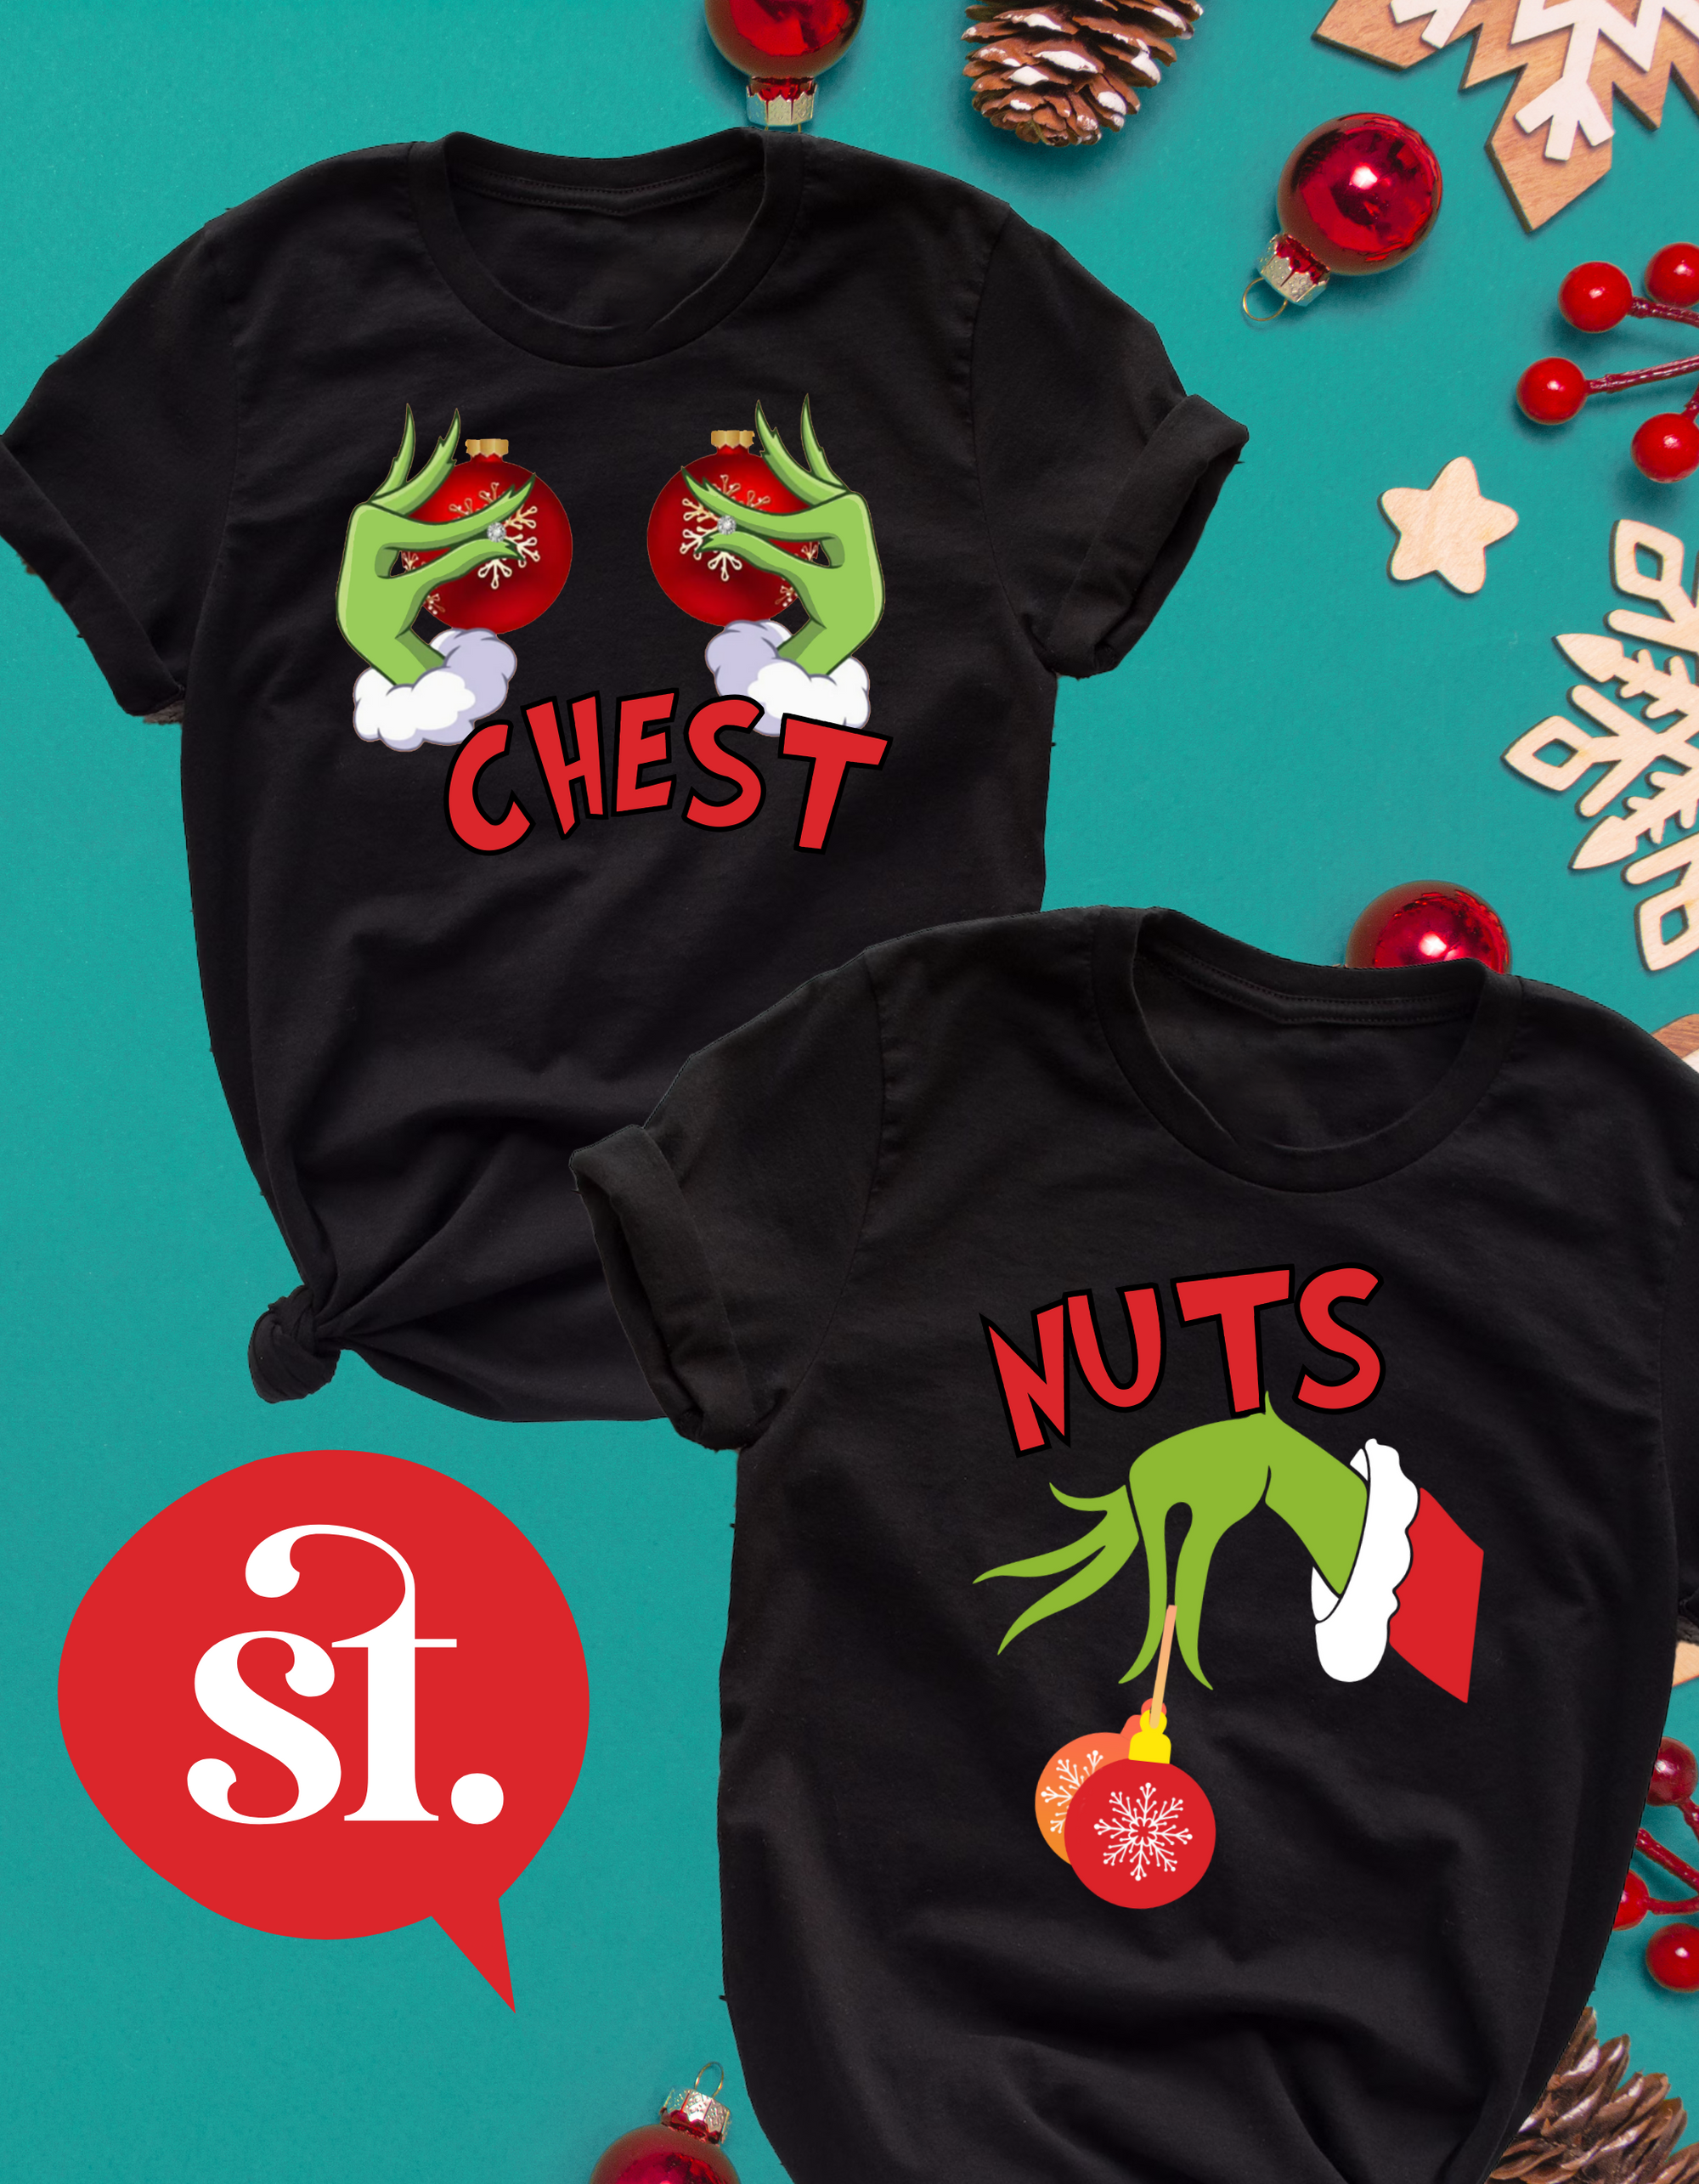 Chest Nuts Grinch Bobbles  - Chest and/or Nuts T-shirts